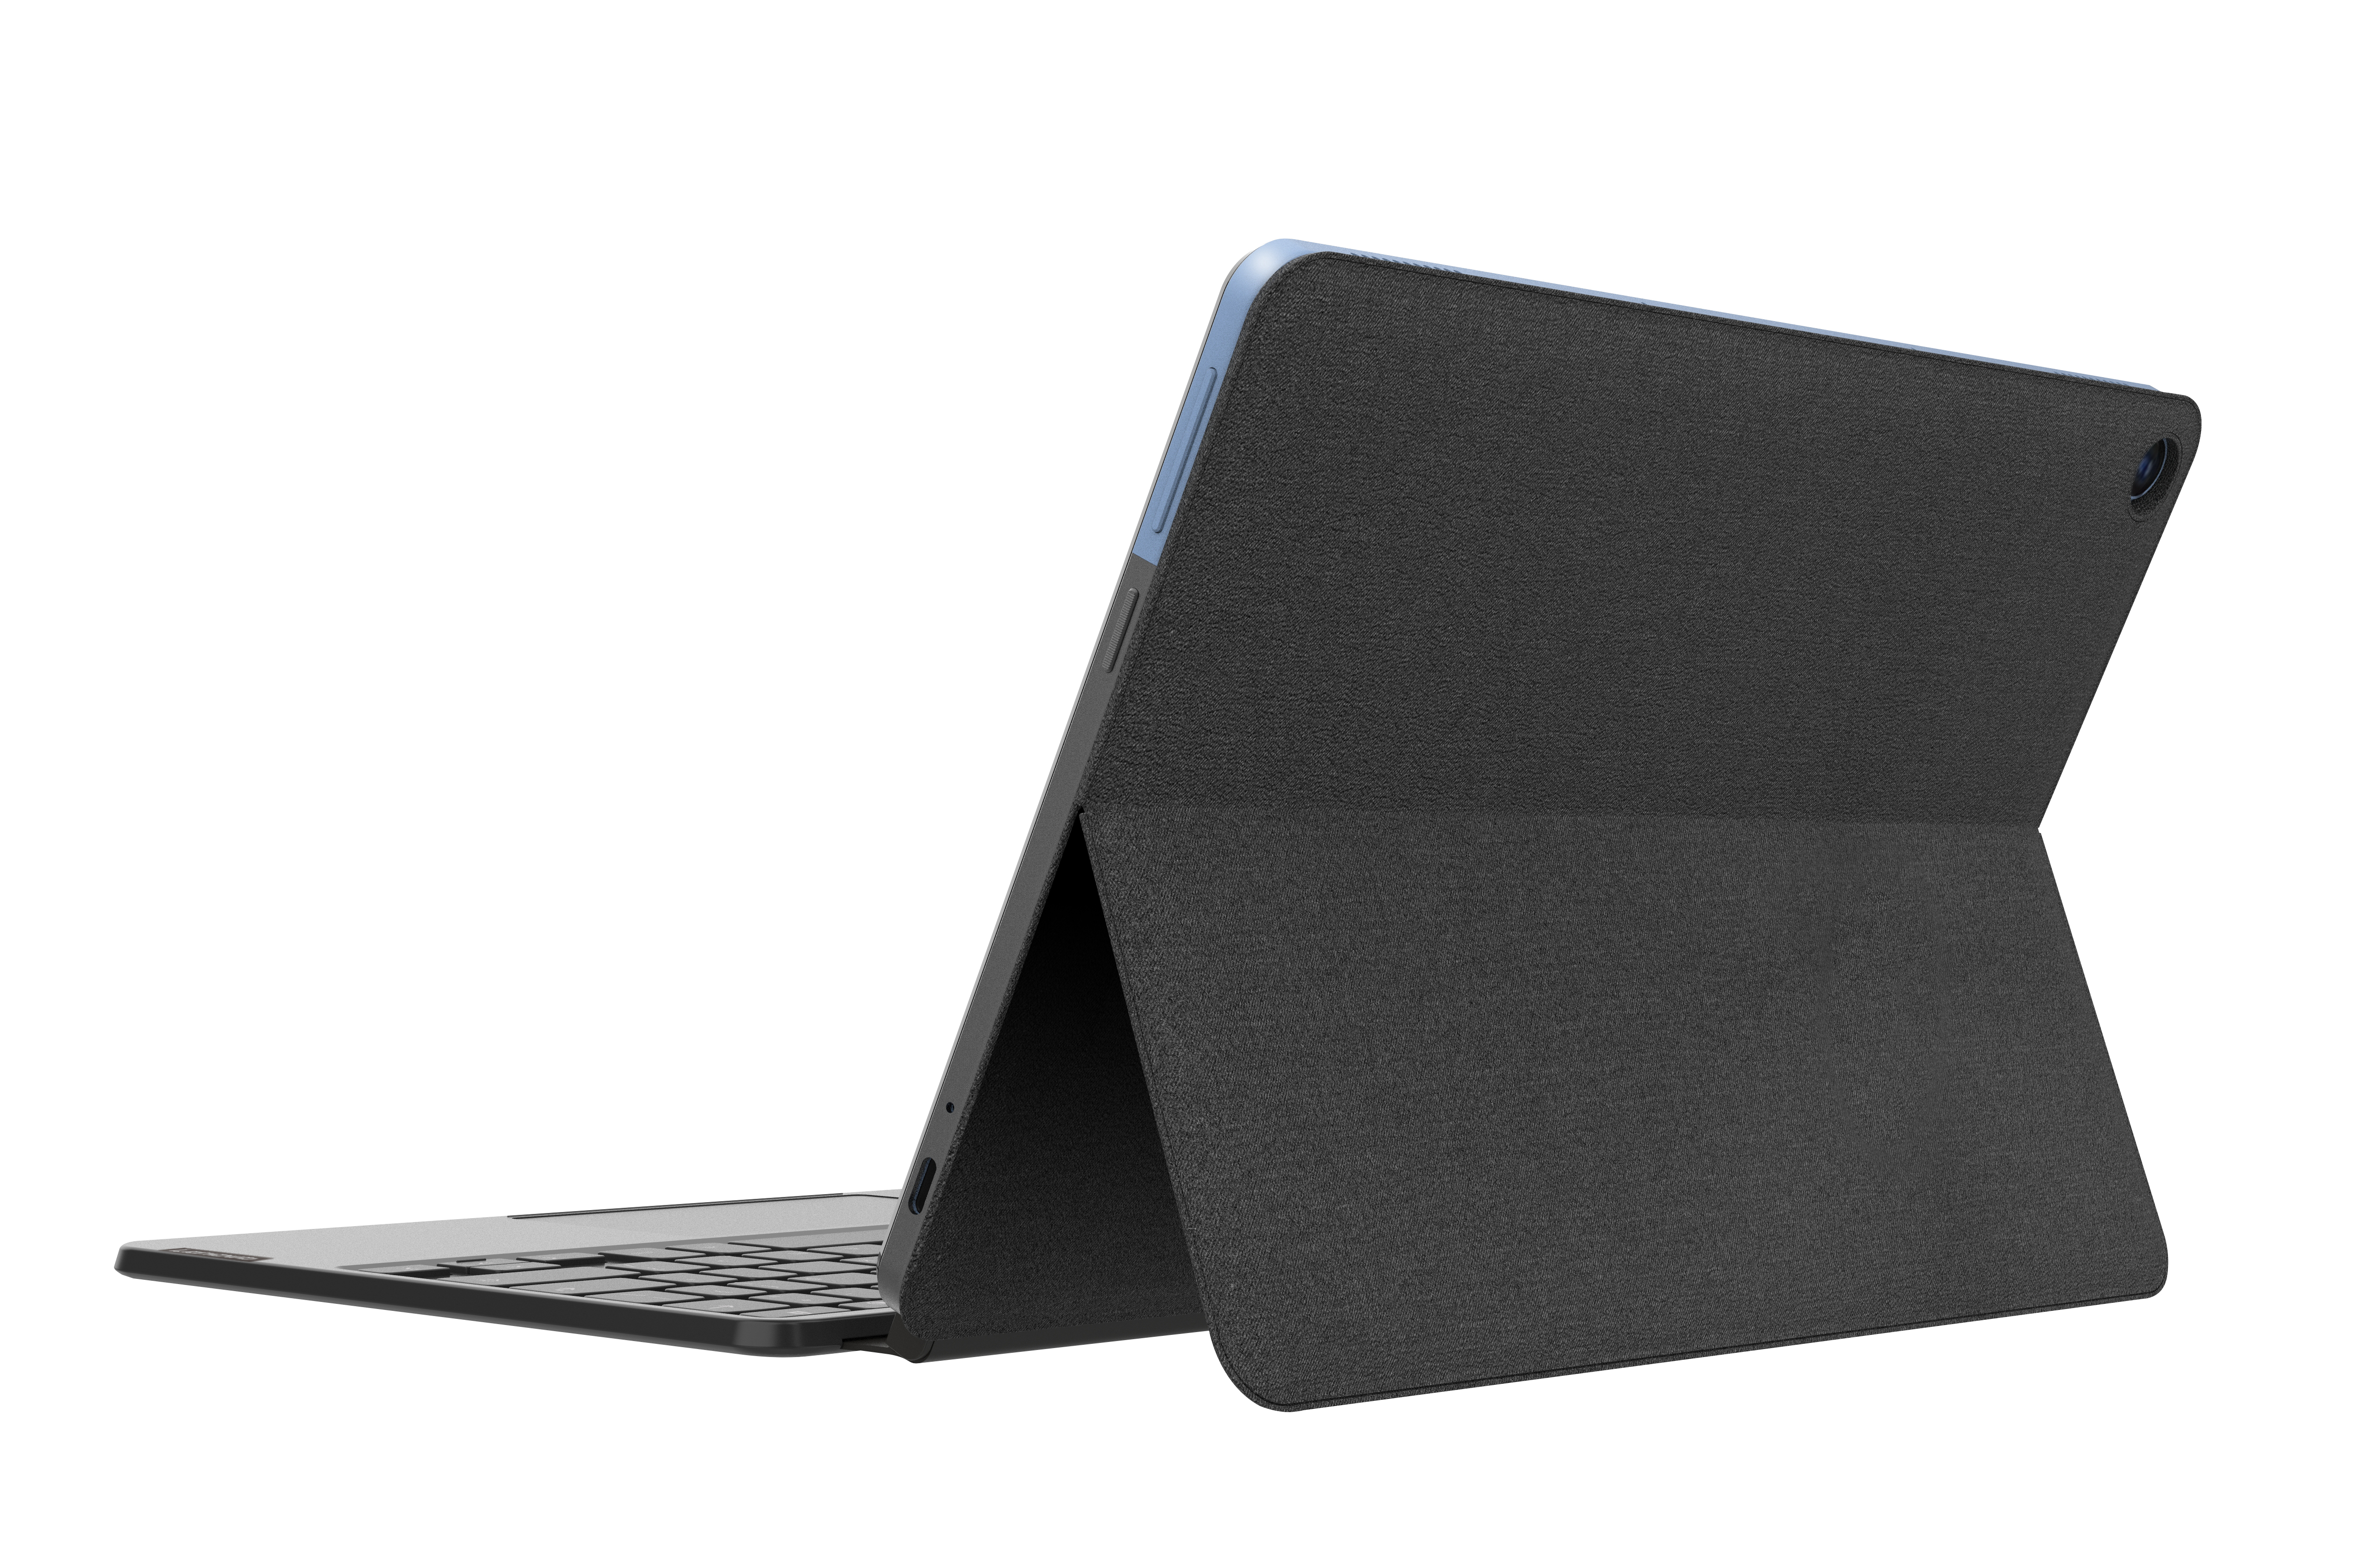 Lenovo IdeaPad Duet tablet now available for $279 - 9to5Google